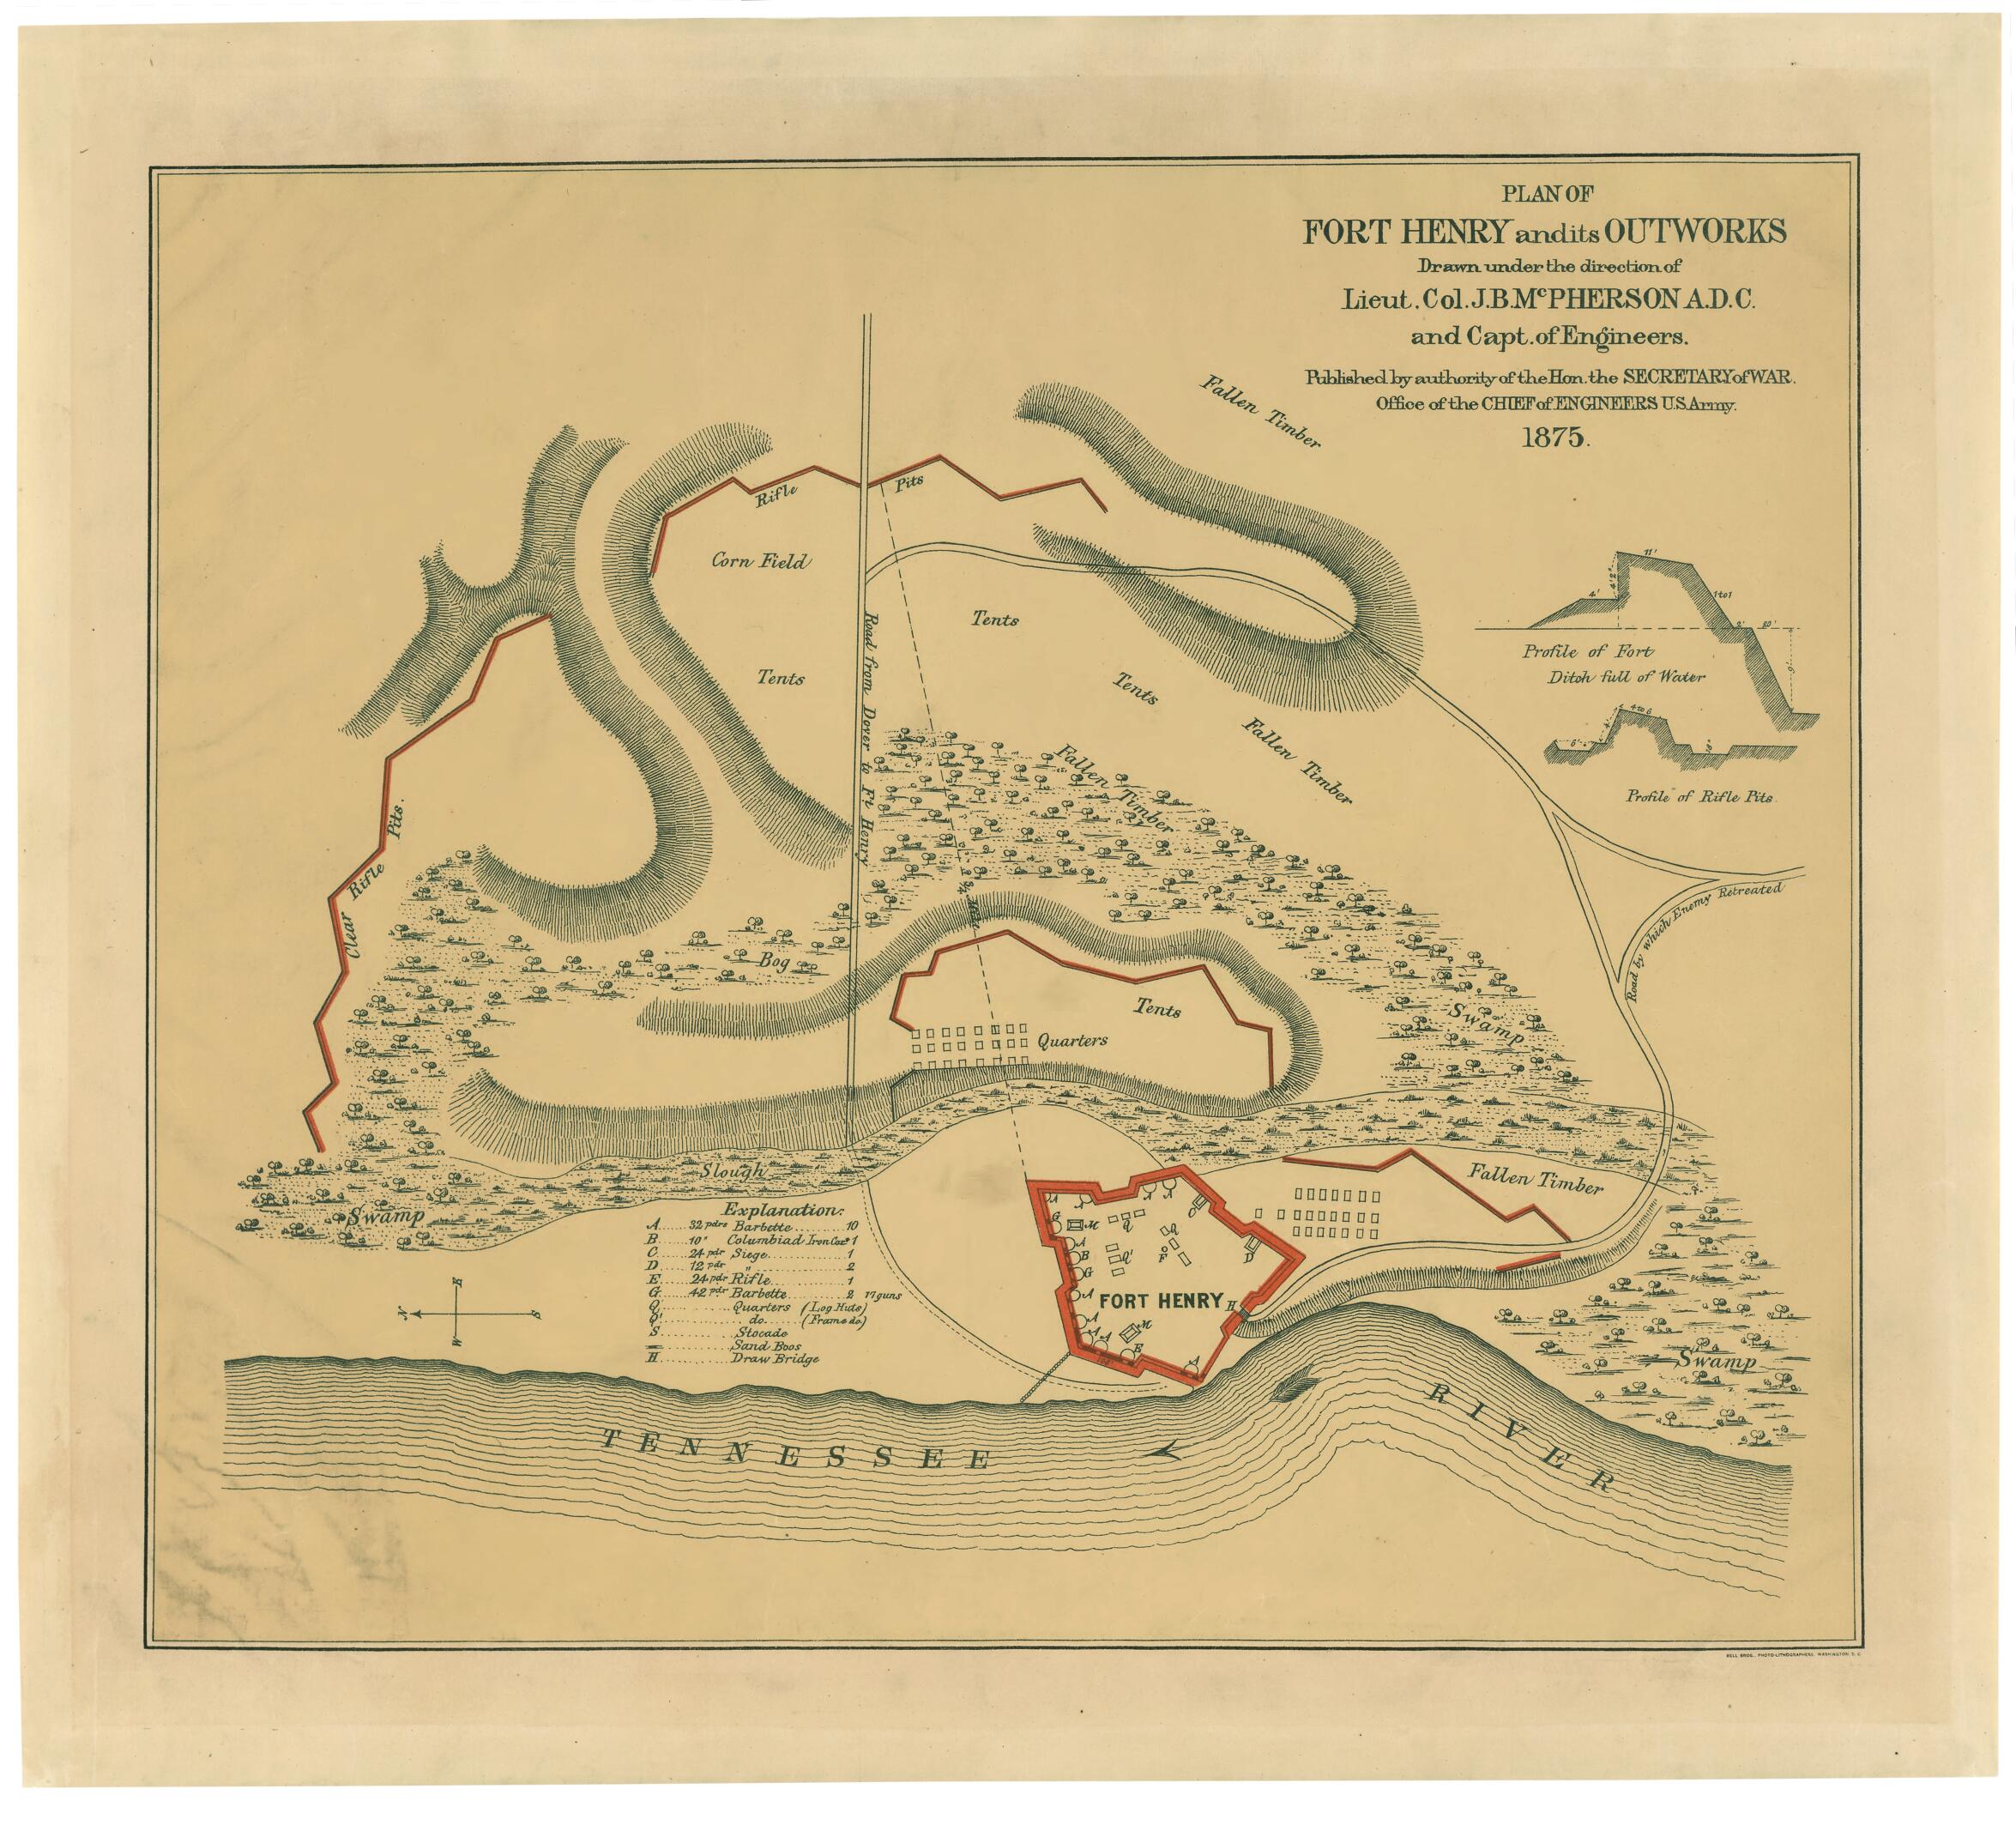 This old map of Plan of Fort Henry and Its Outworks from 1875 was created by James Birdseye McPherson,  United States. Army. Corps of Engineers in 1875